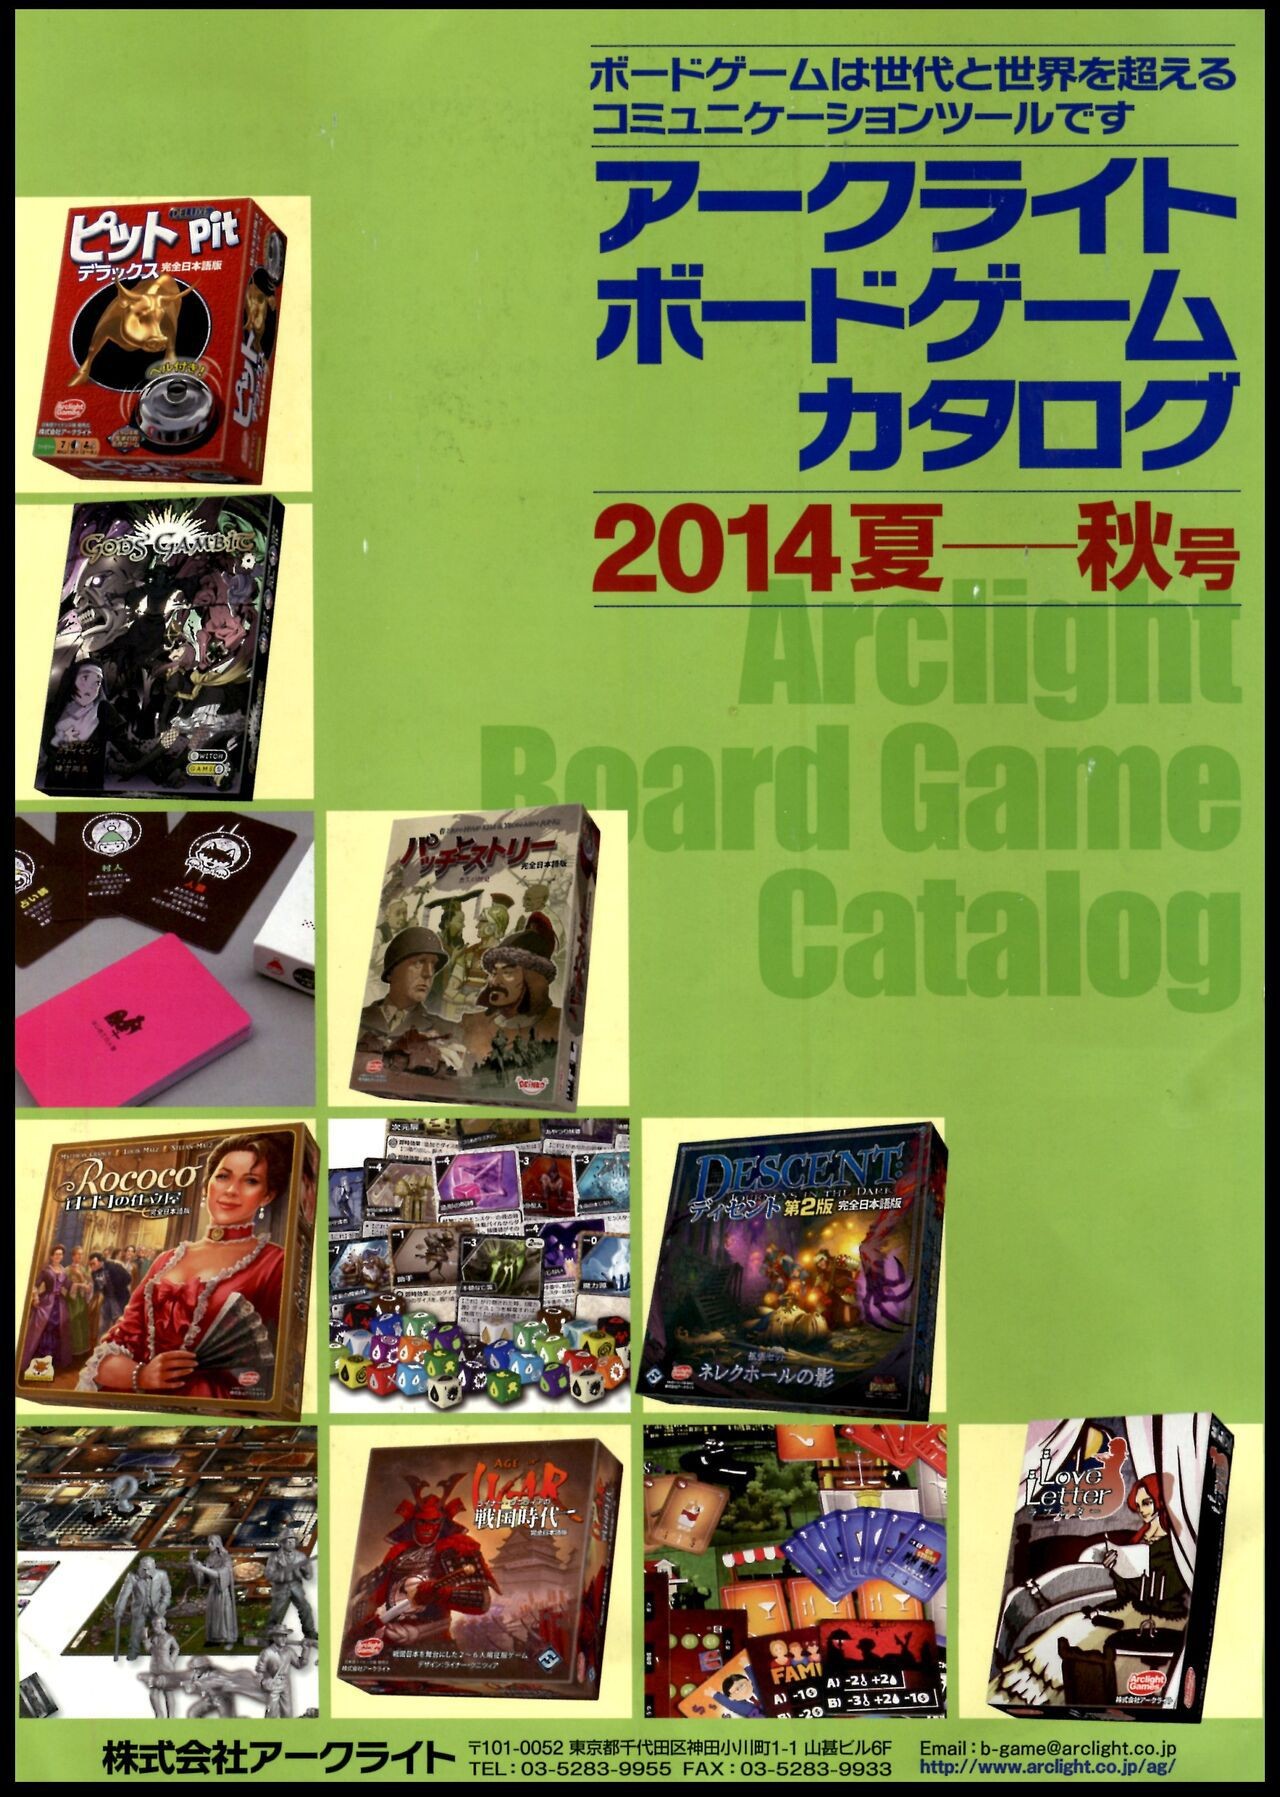 Housewife [Arclight Games] Board Game Catalog 2014 Summer - Autumn [アークライト] ボードゲームカタログ 2014 夏-秋 Highheels